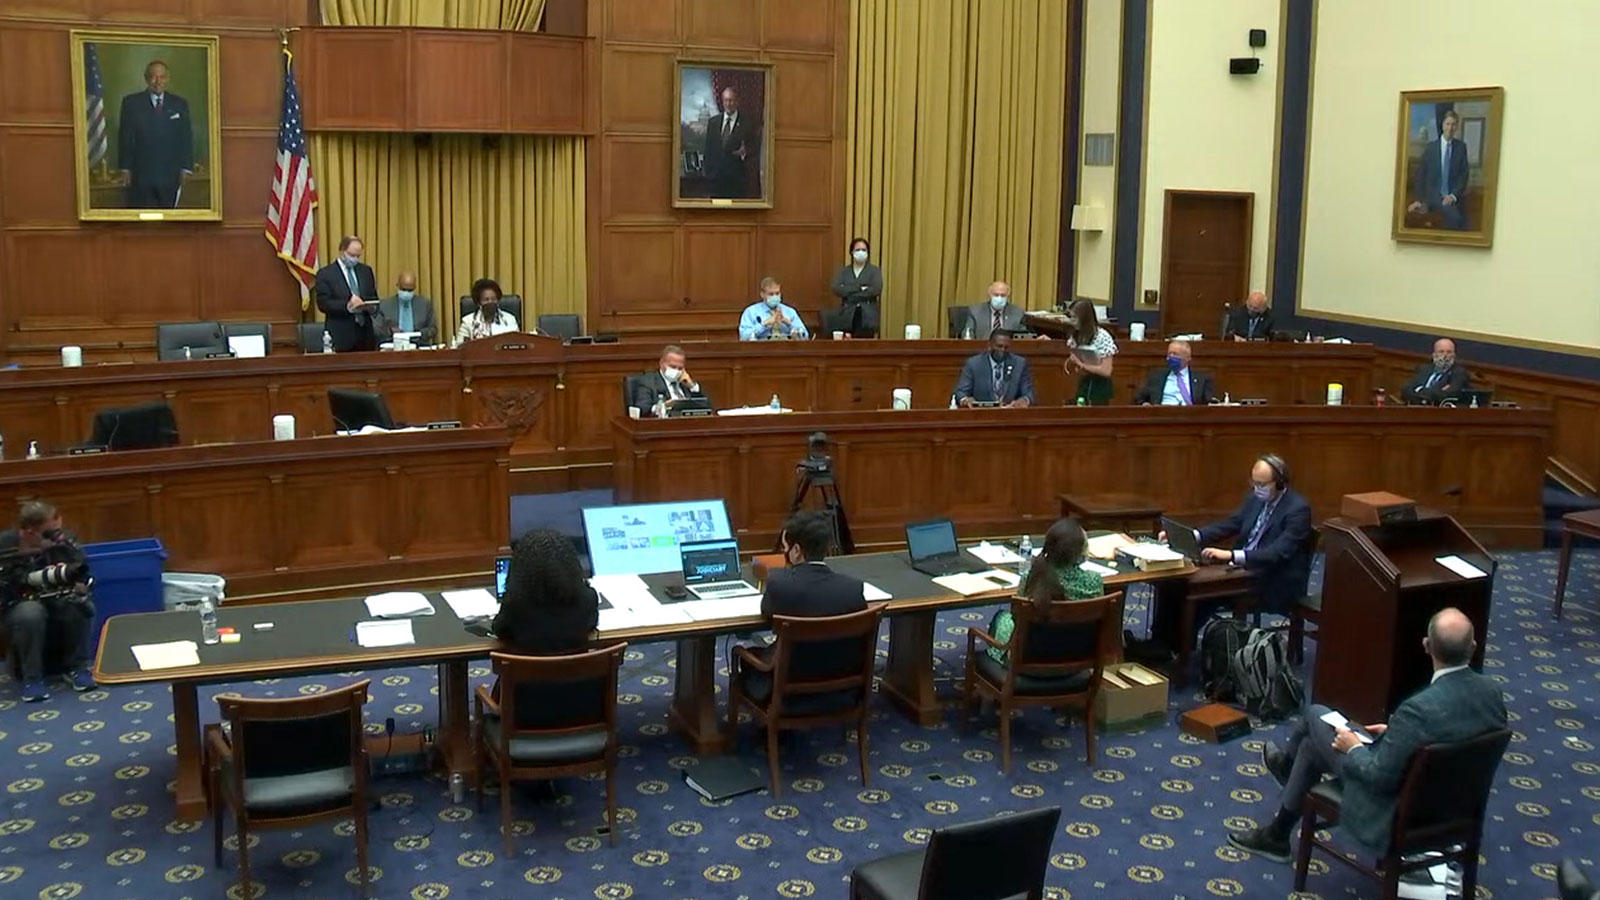 National African American Reparations Commission Hails Vote on HR-40